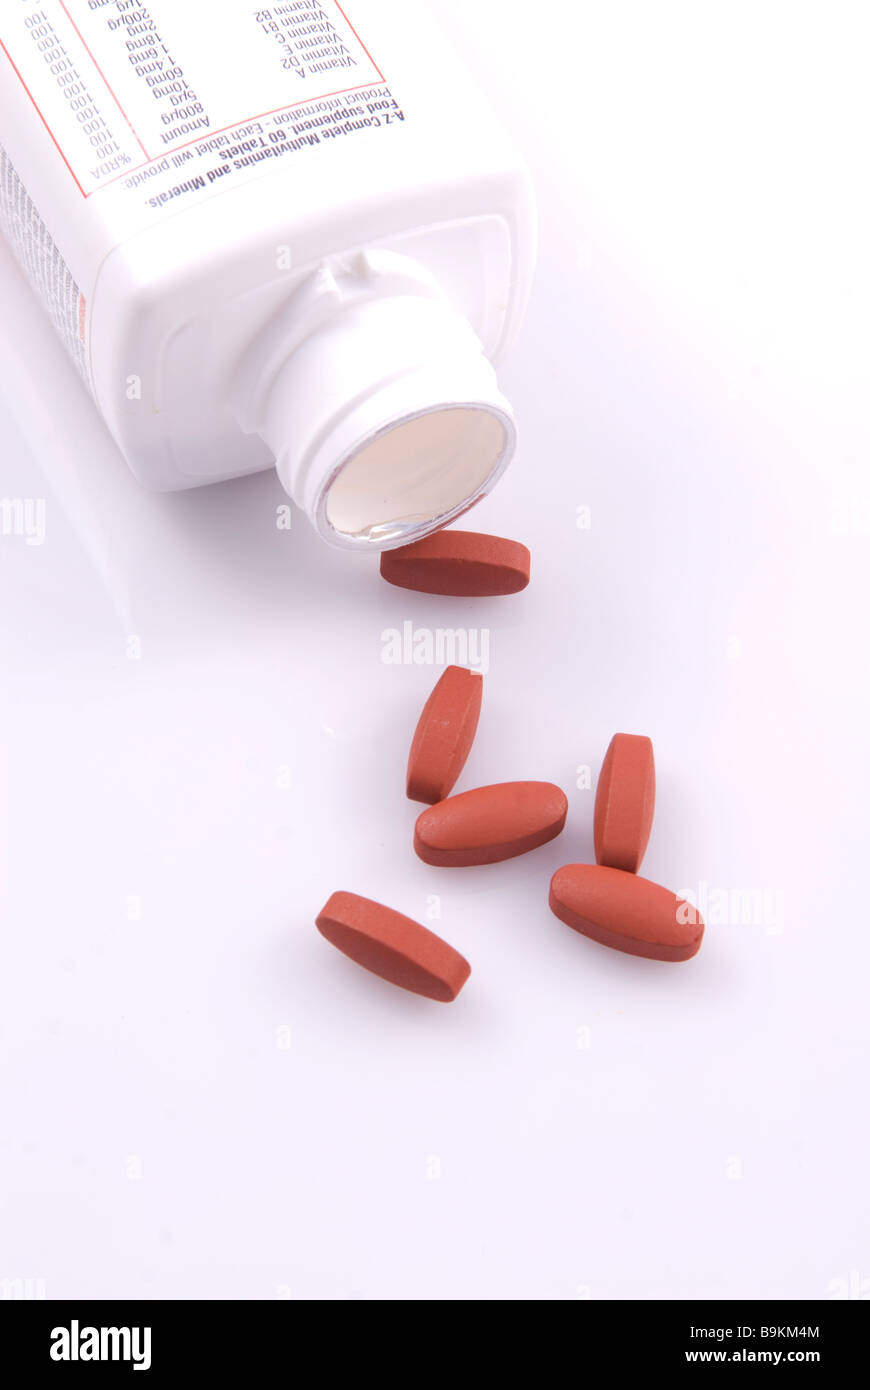 Multivitamin bottle and pills isolated against a white background Stock Photo